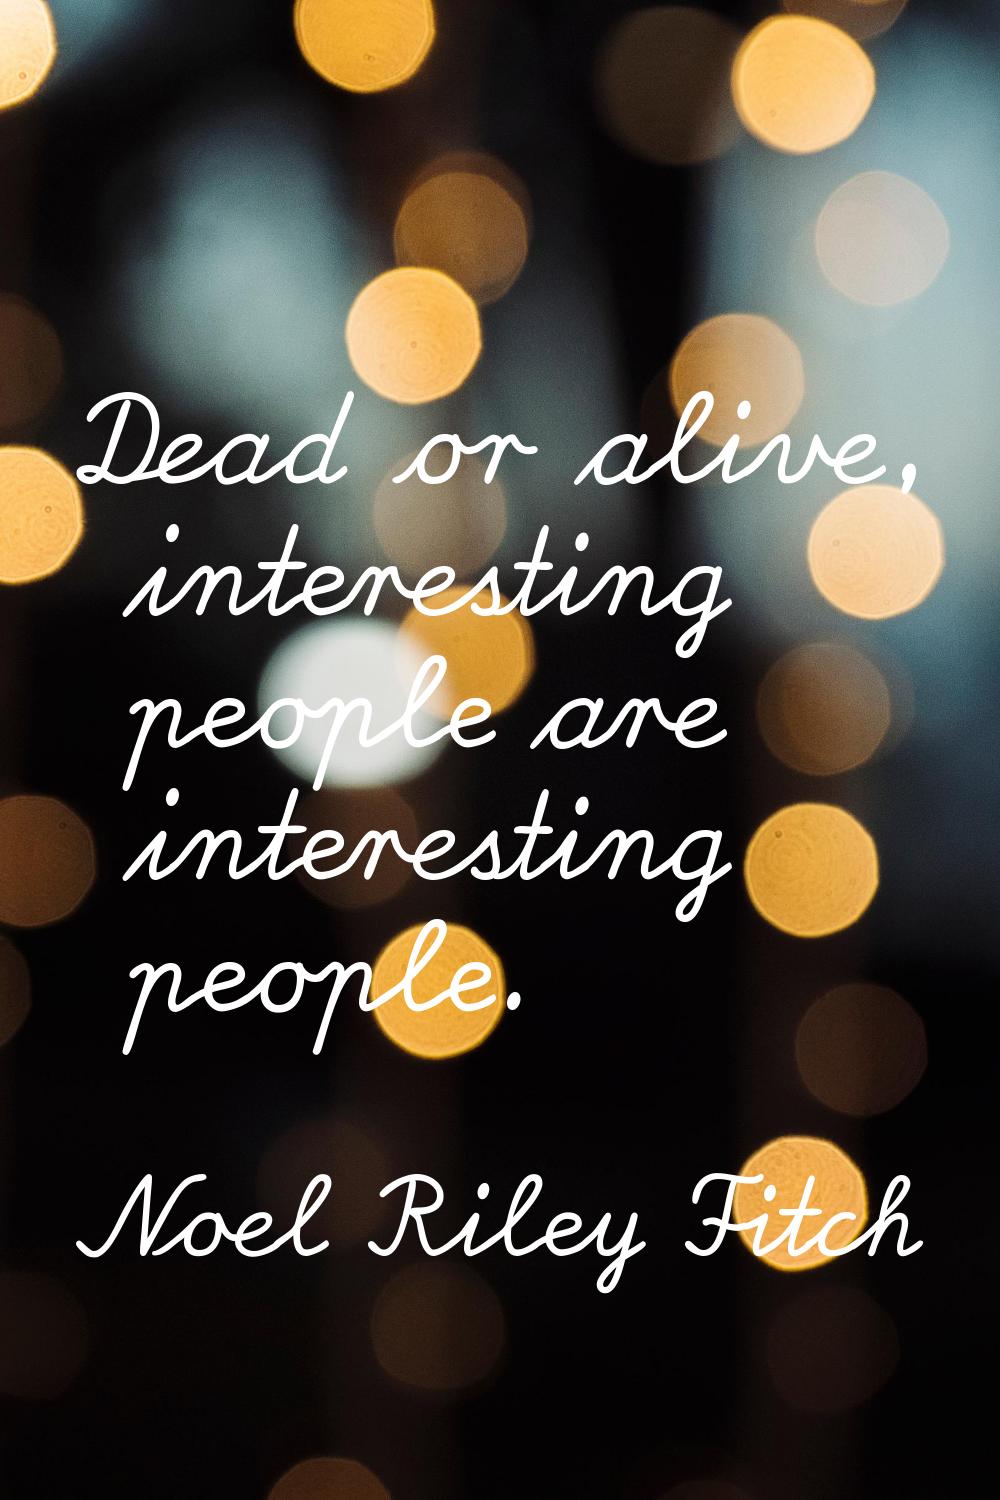 Dead or alive, interesting people are interesting people.